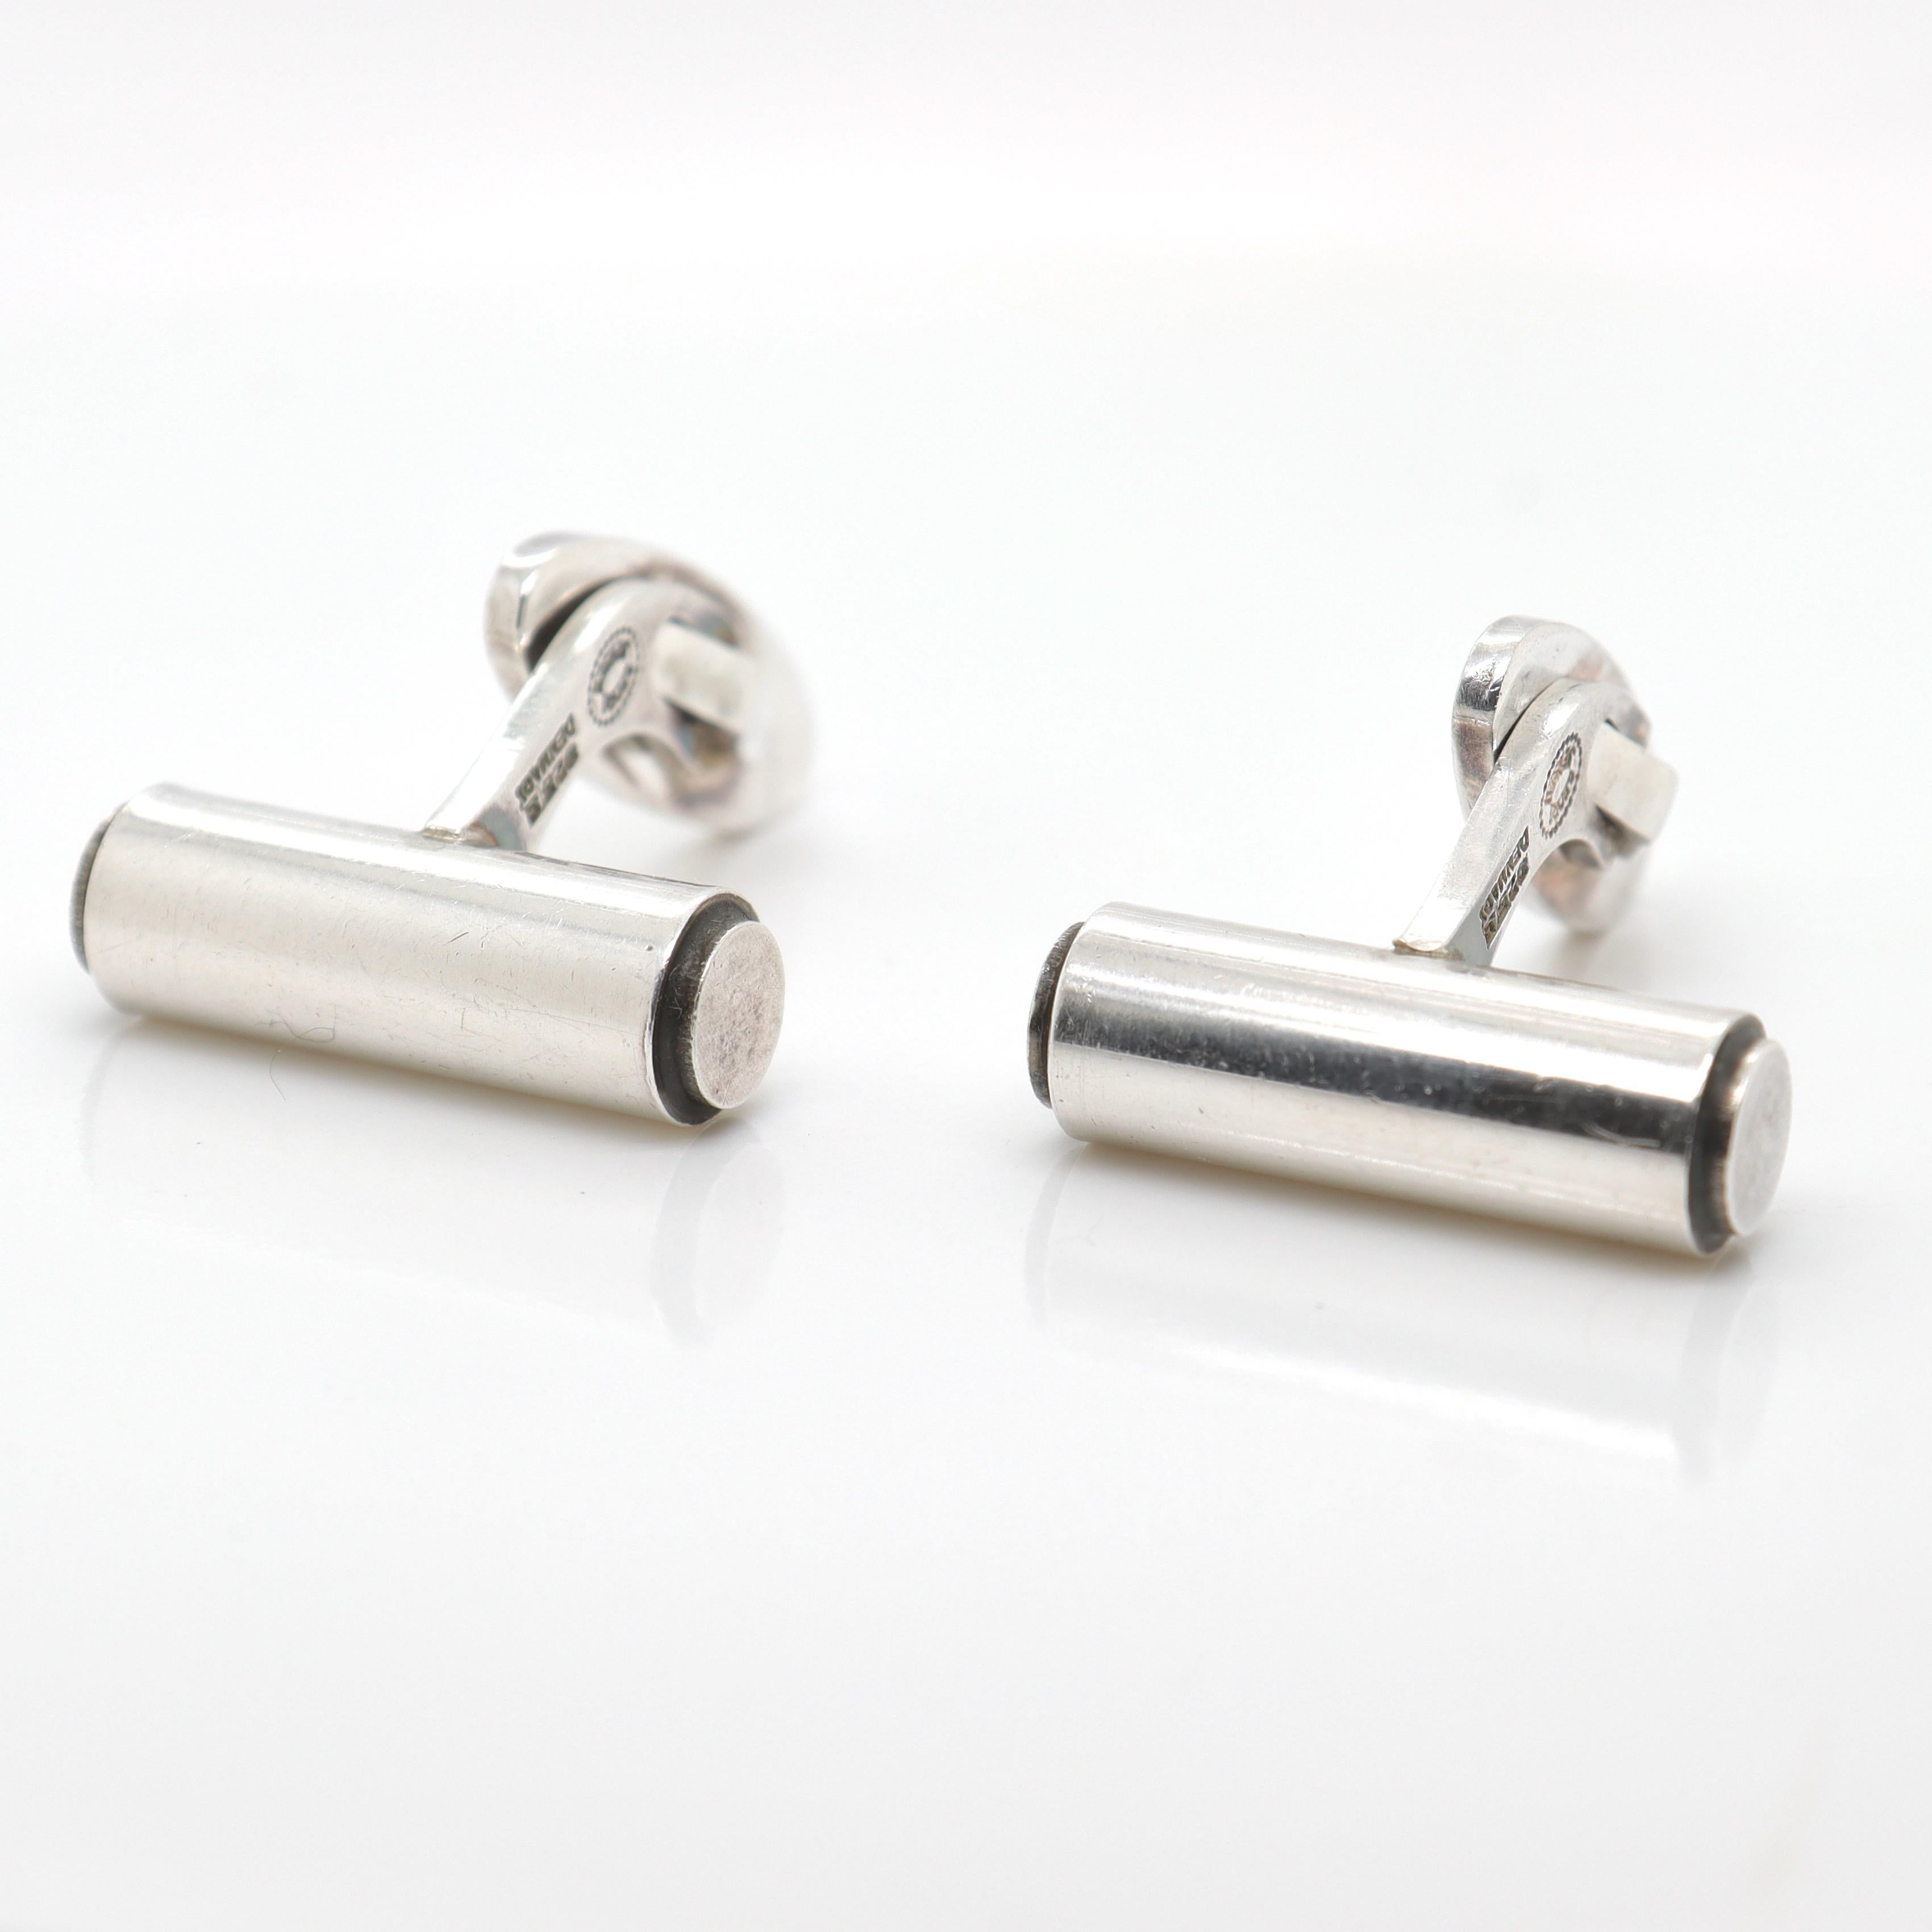 A fine pair of Georg Jensen sterling silver cufflinks

Model no. 96.

Designed by Harry V. Larsen for Georg Jensen circa 1960. 

Simply a wonderful pair of cufflinks from one of Denmark's premier silversmiths!

Date:
20th Century, post-1945

Overall